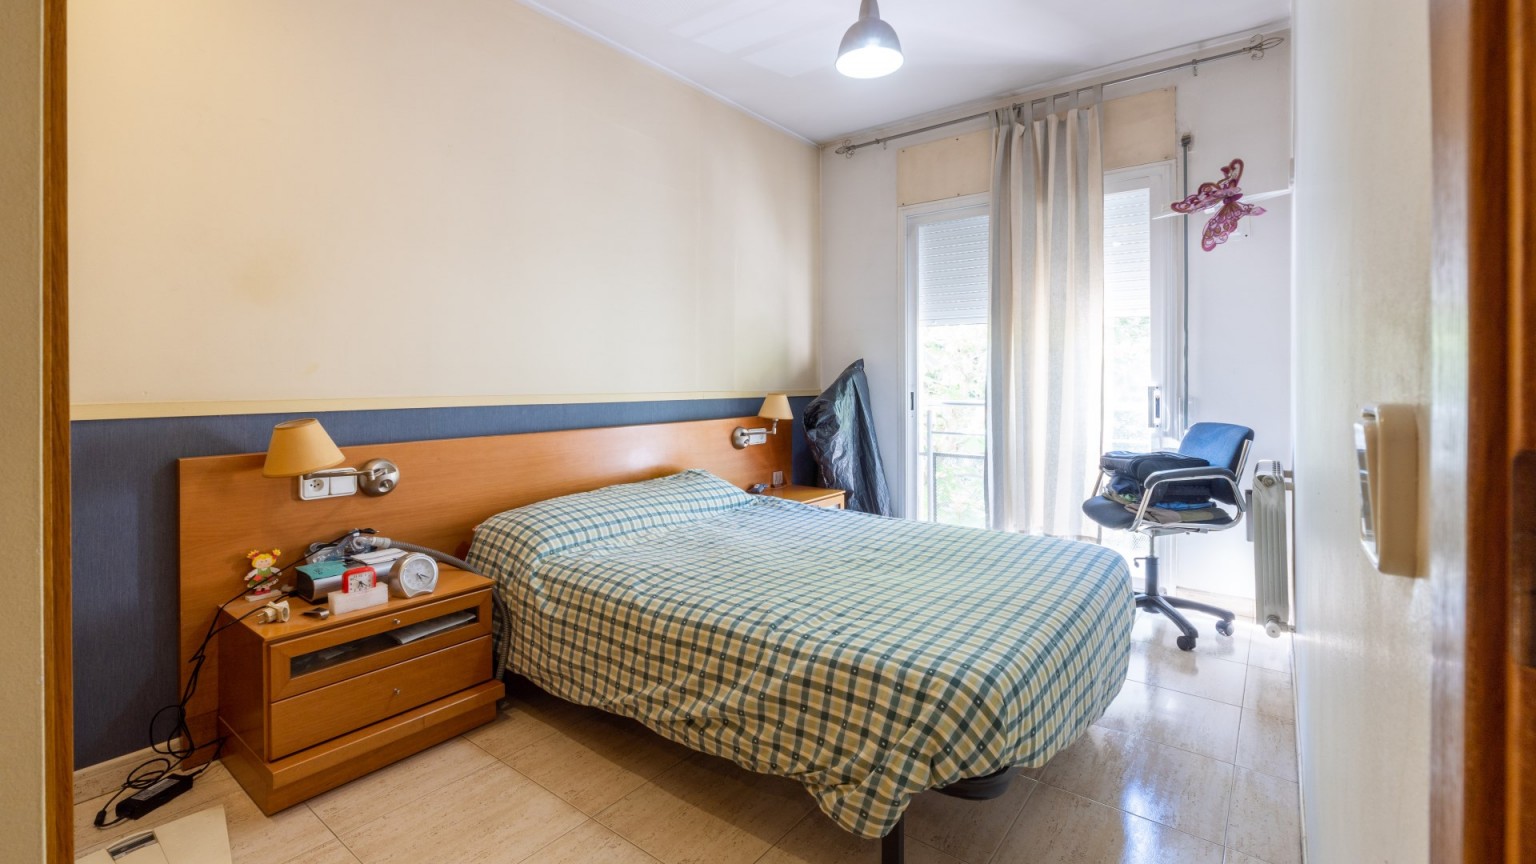 Flat for sale in perfect condition located in La Devesa in Girona.